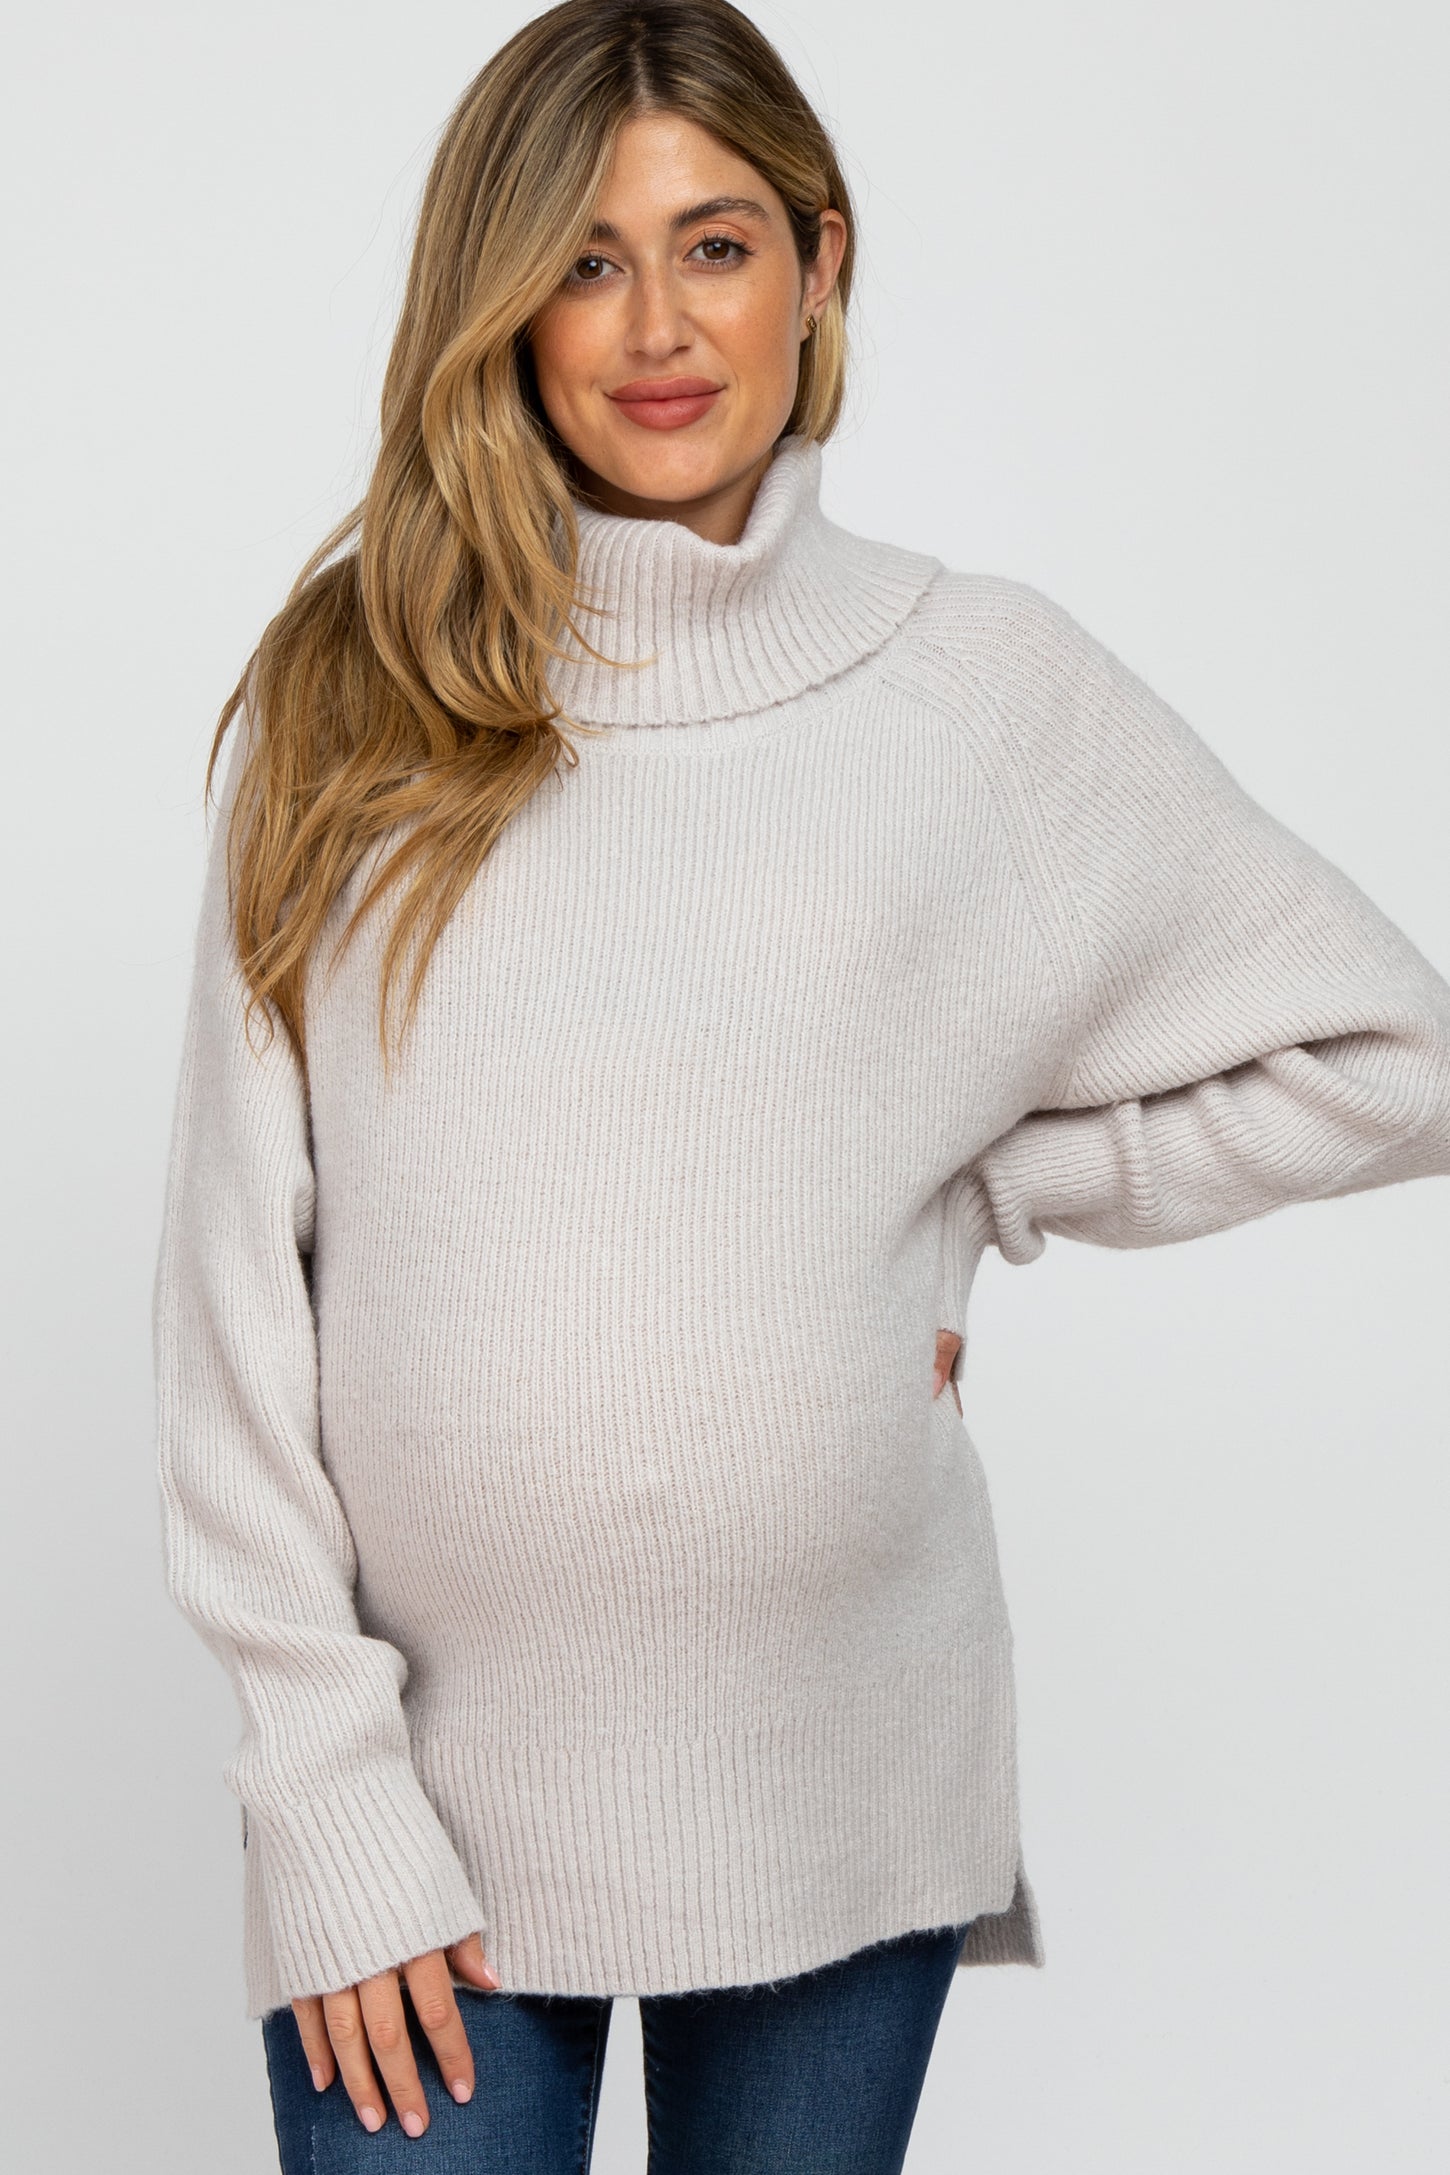 Long Sleeve Turtleneck Maternity Top - A Pea In the Pod